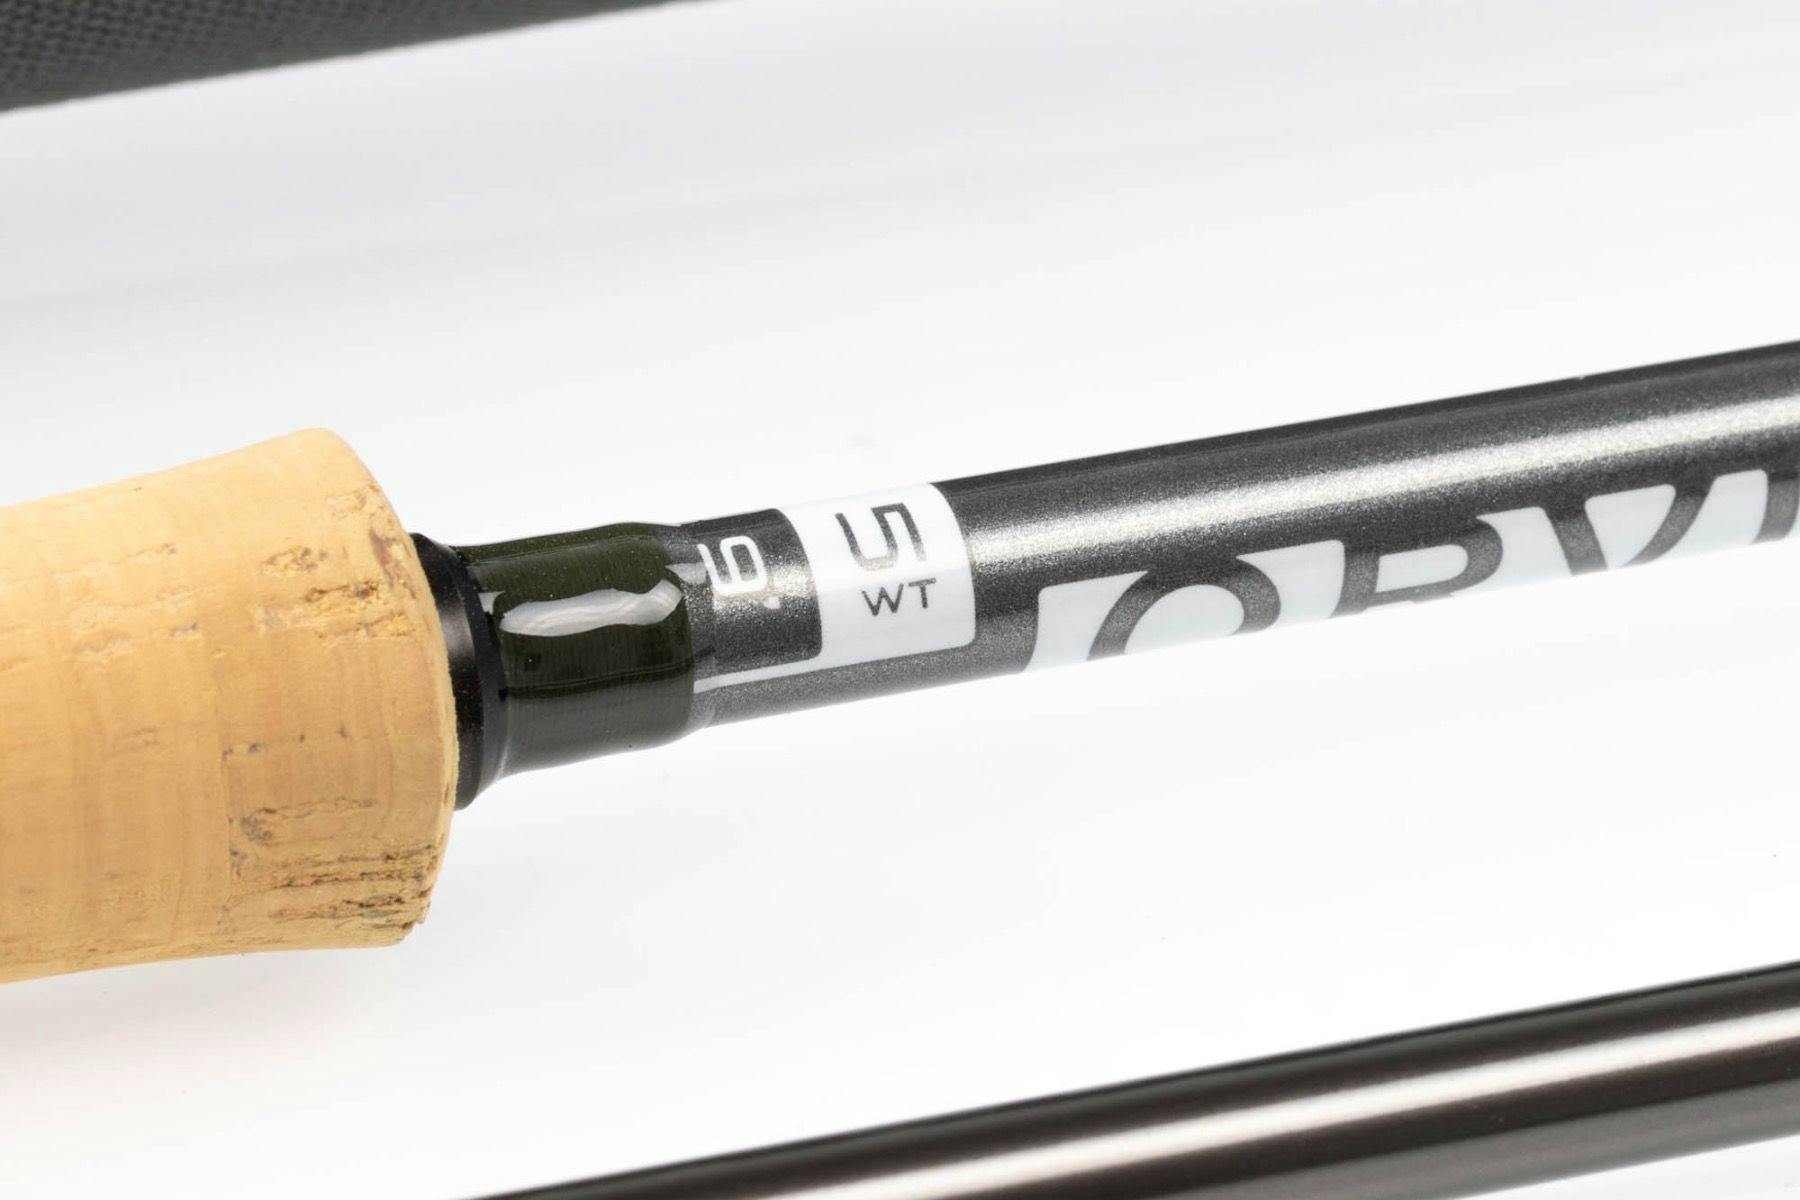 Orvis Clearwater Fly Rod · 7'6" · 4 wt